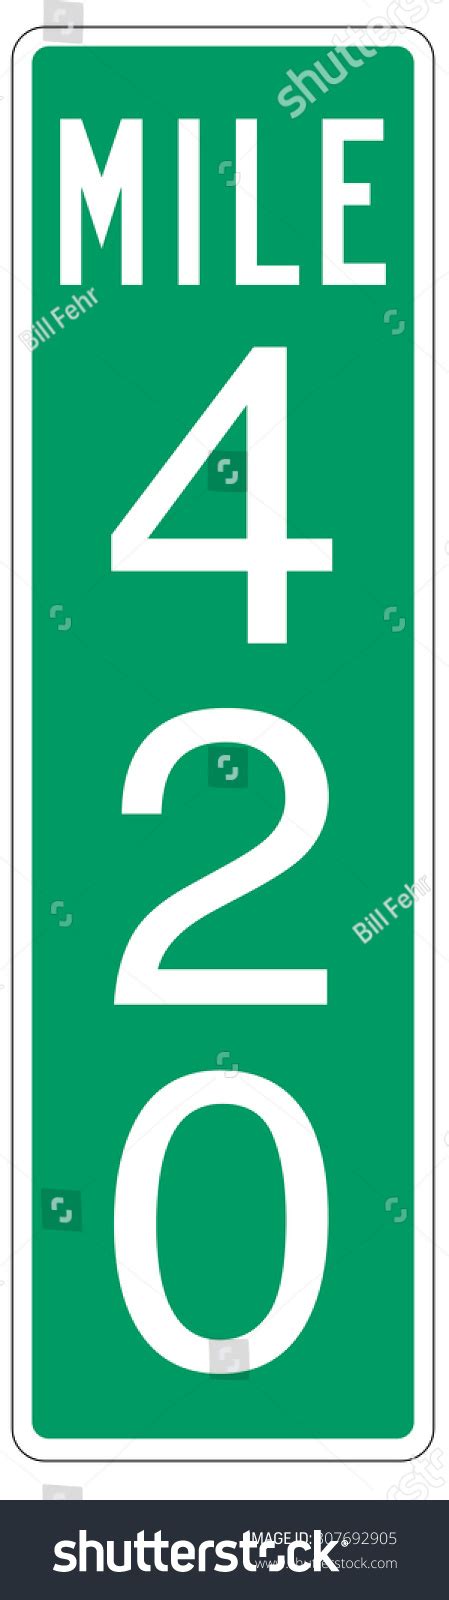 Mile 420 Mile Marker Street Sign Stock Vector Royalty Free 307692905